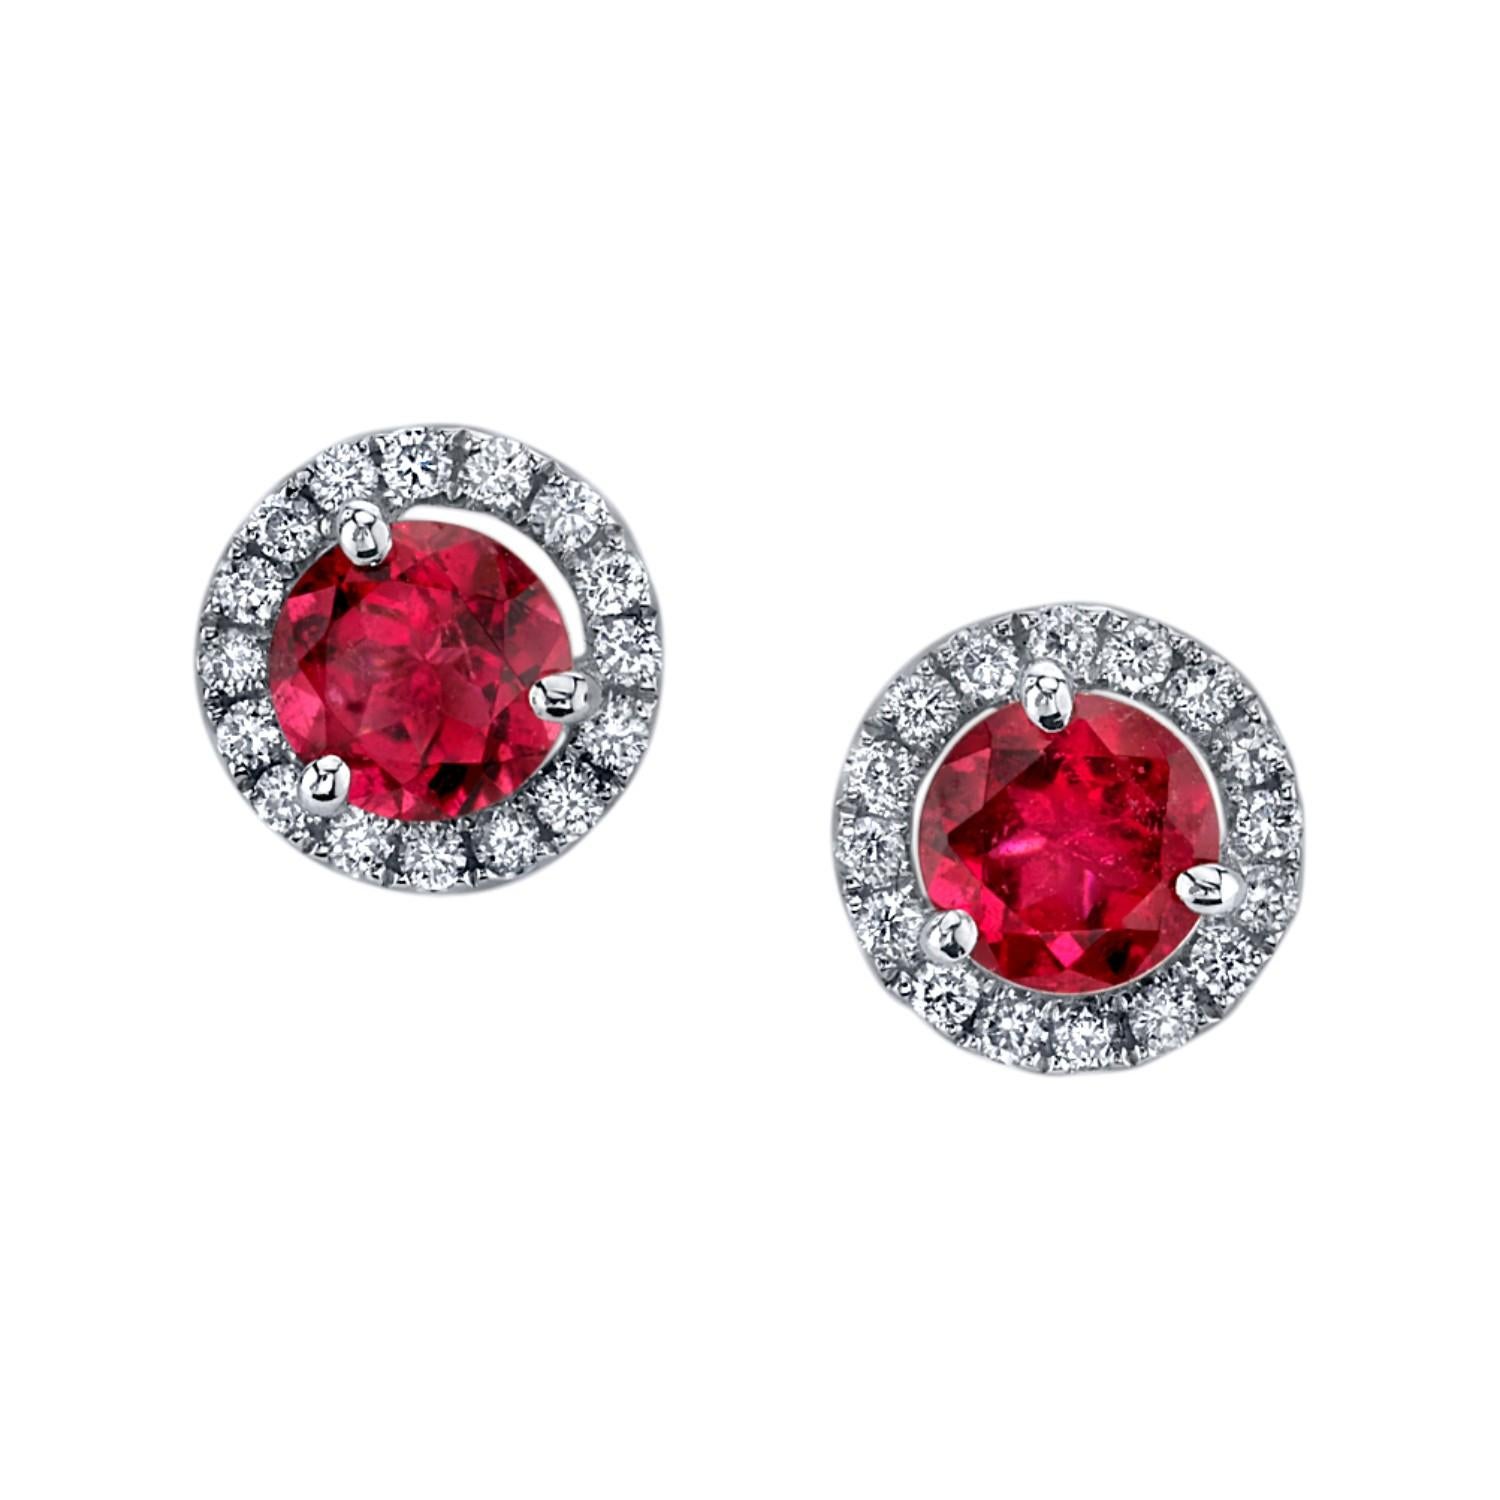 Red Rubellite Tourmaline and Diamond Halo Stud Earrings in 18k White Gold 